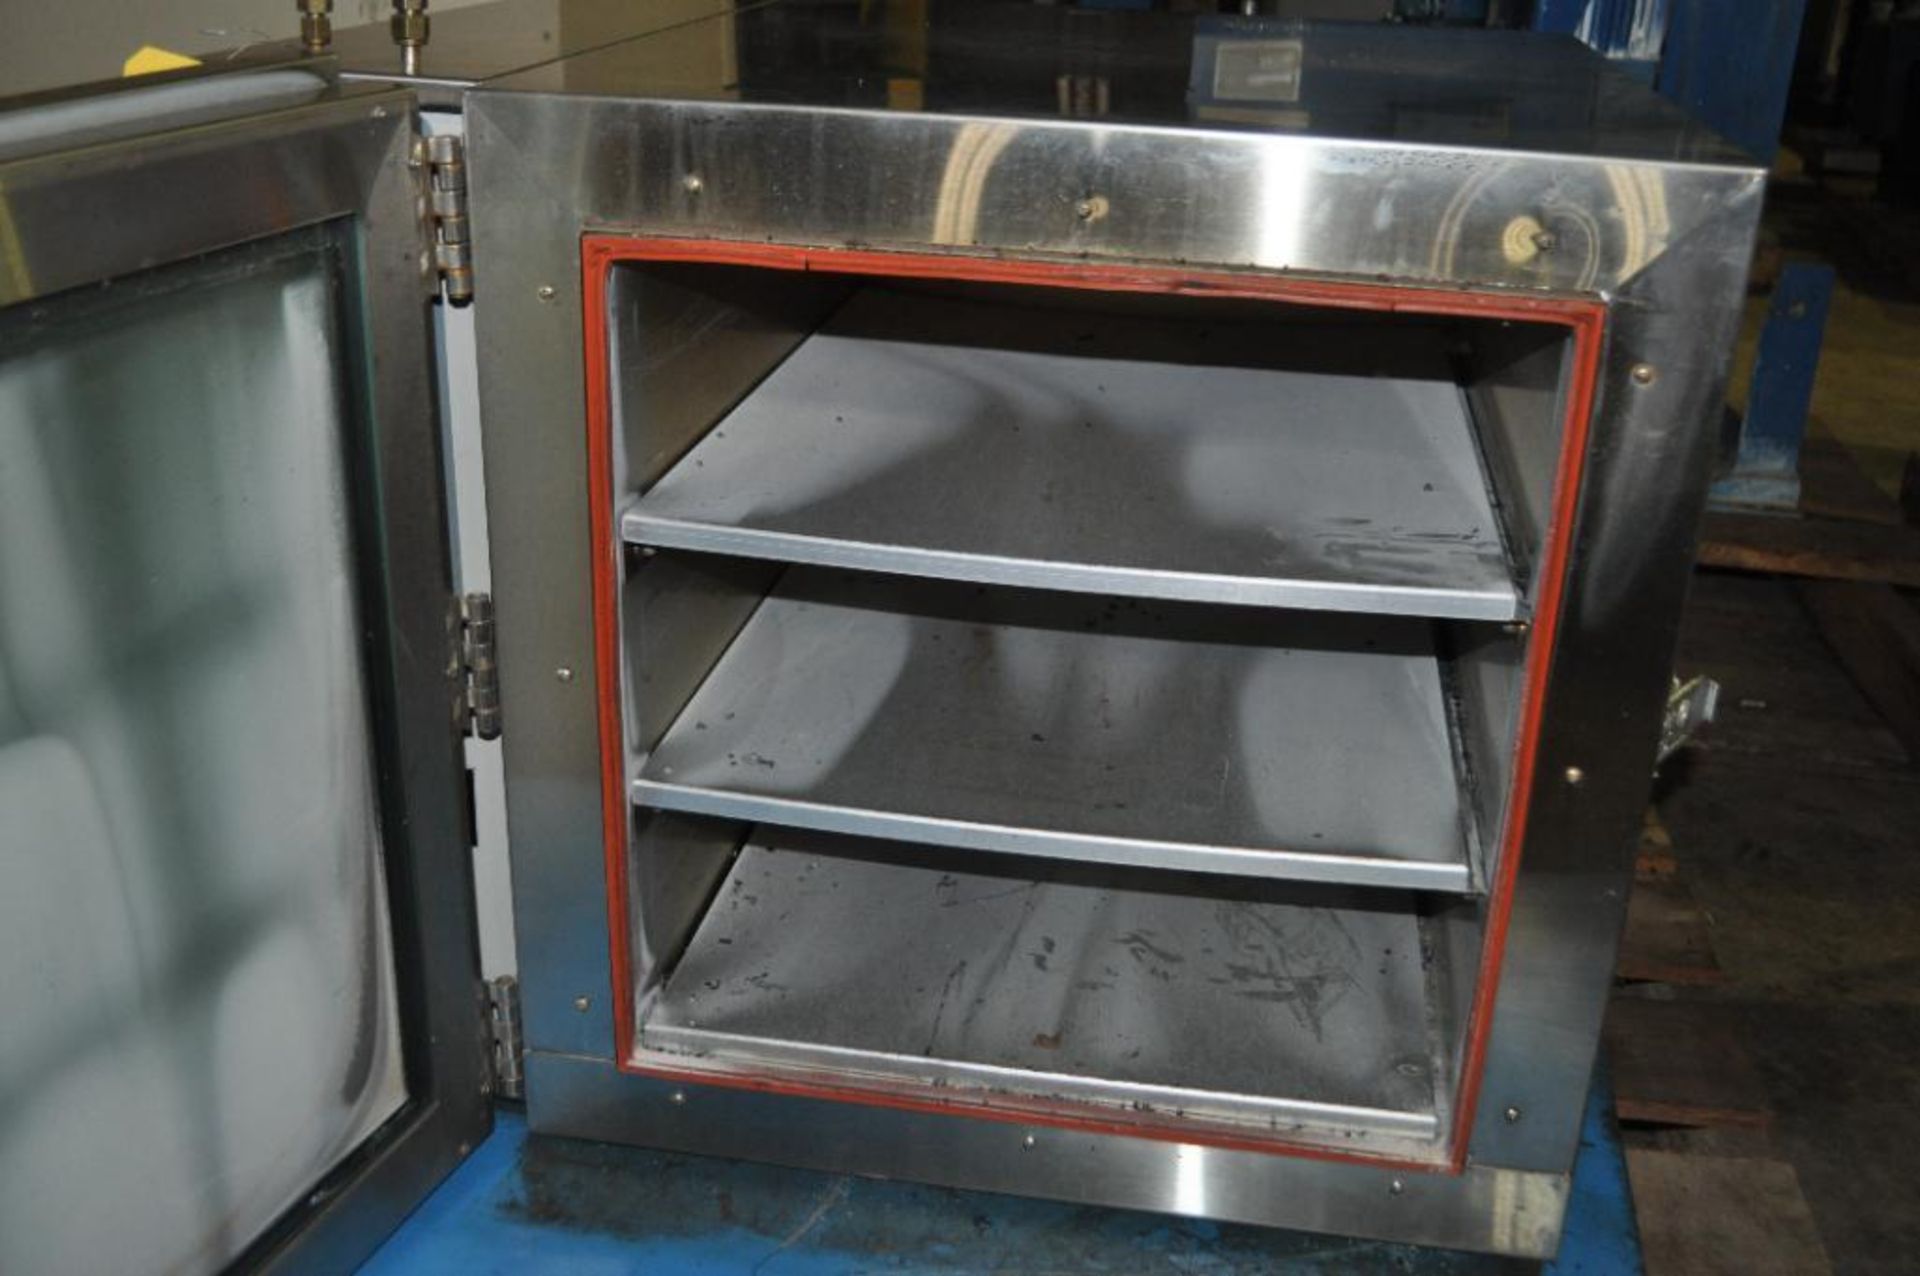 VWR STAINLESS STEEL VACUUM OVEN, MODEL: 1450M-2, 220 VOLTS - Image 3 of 5